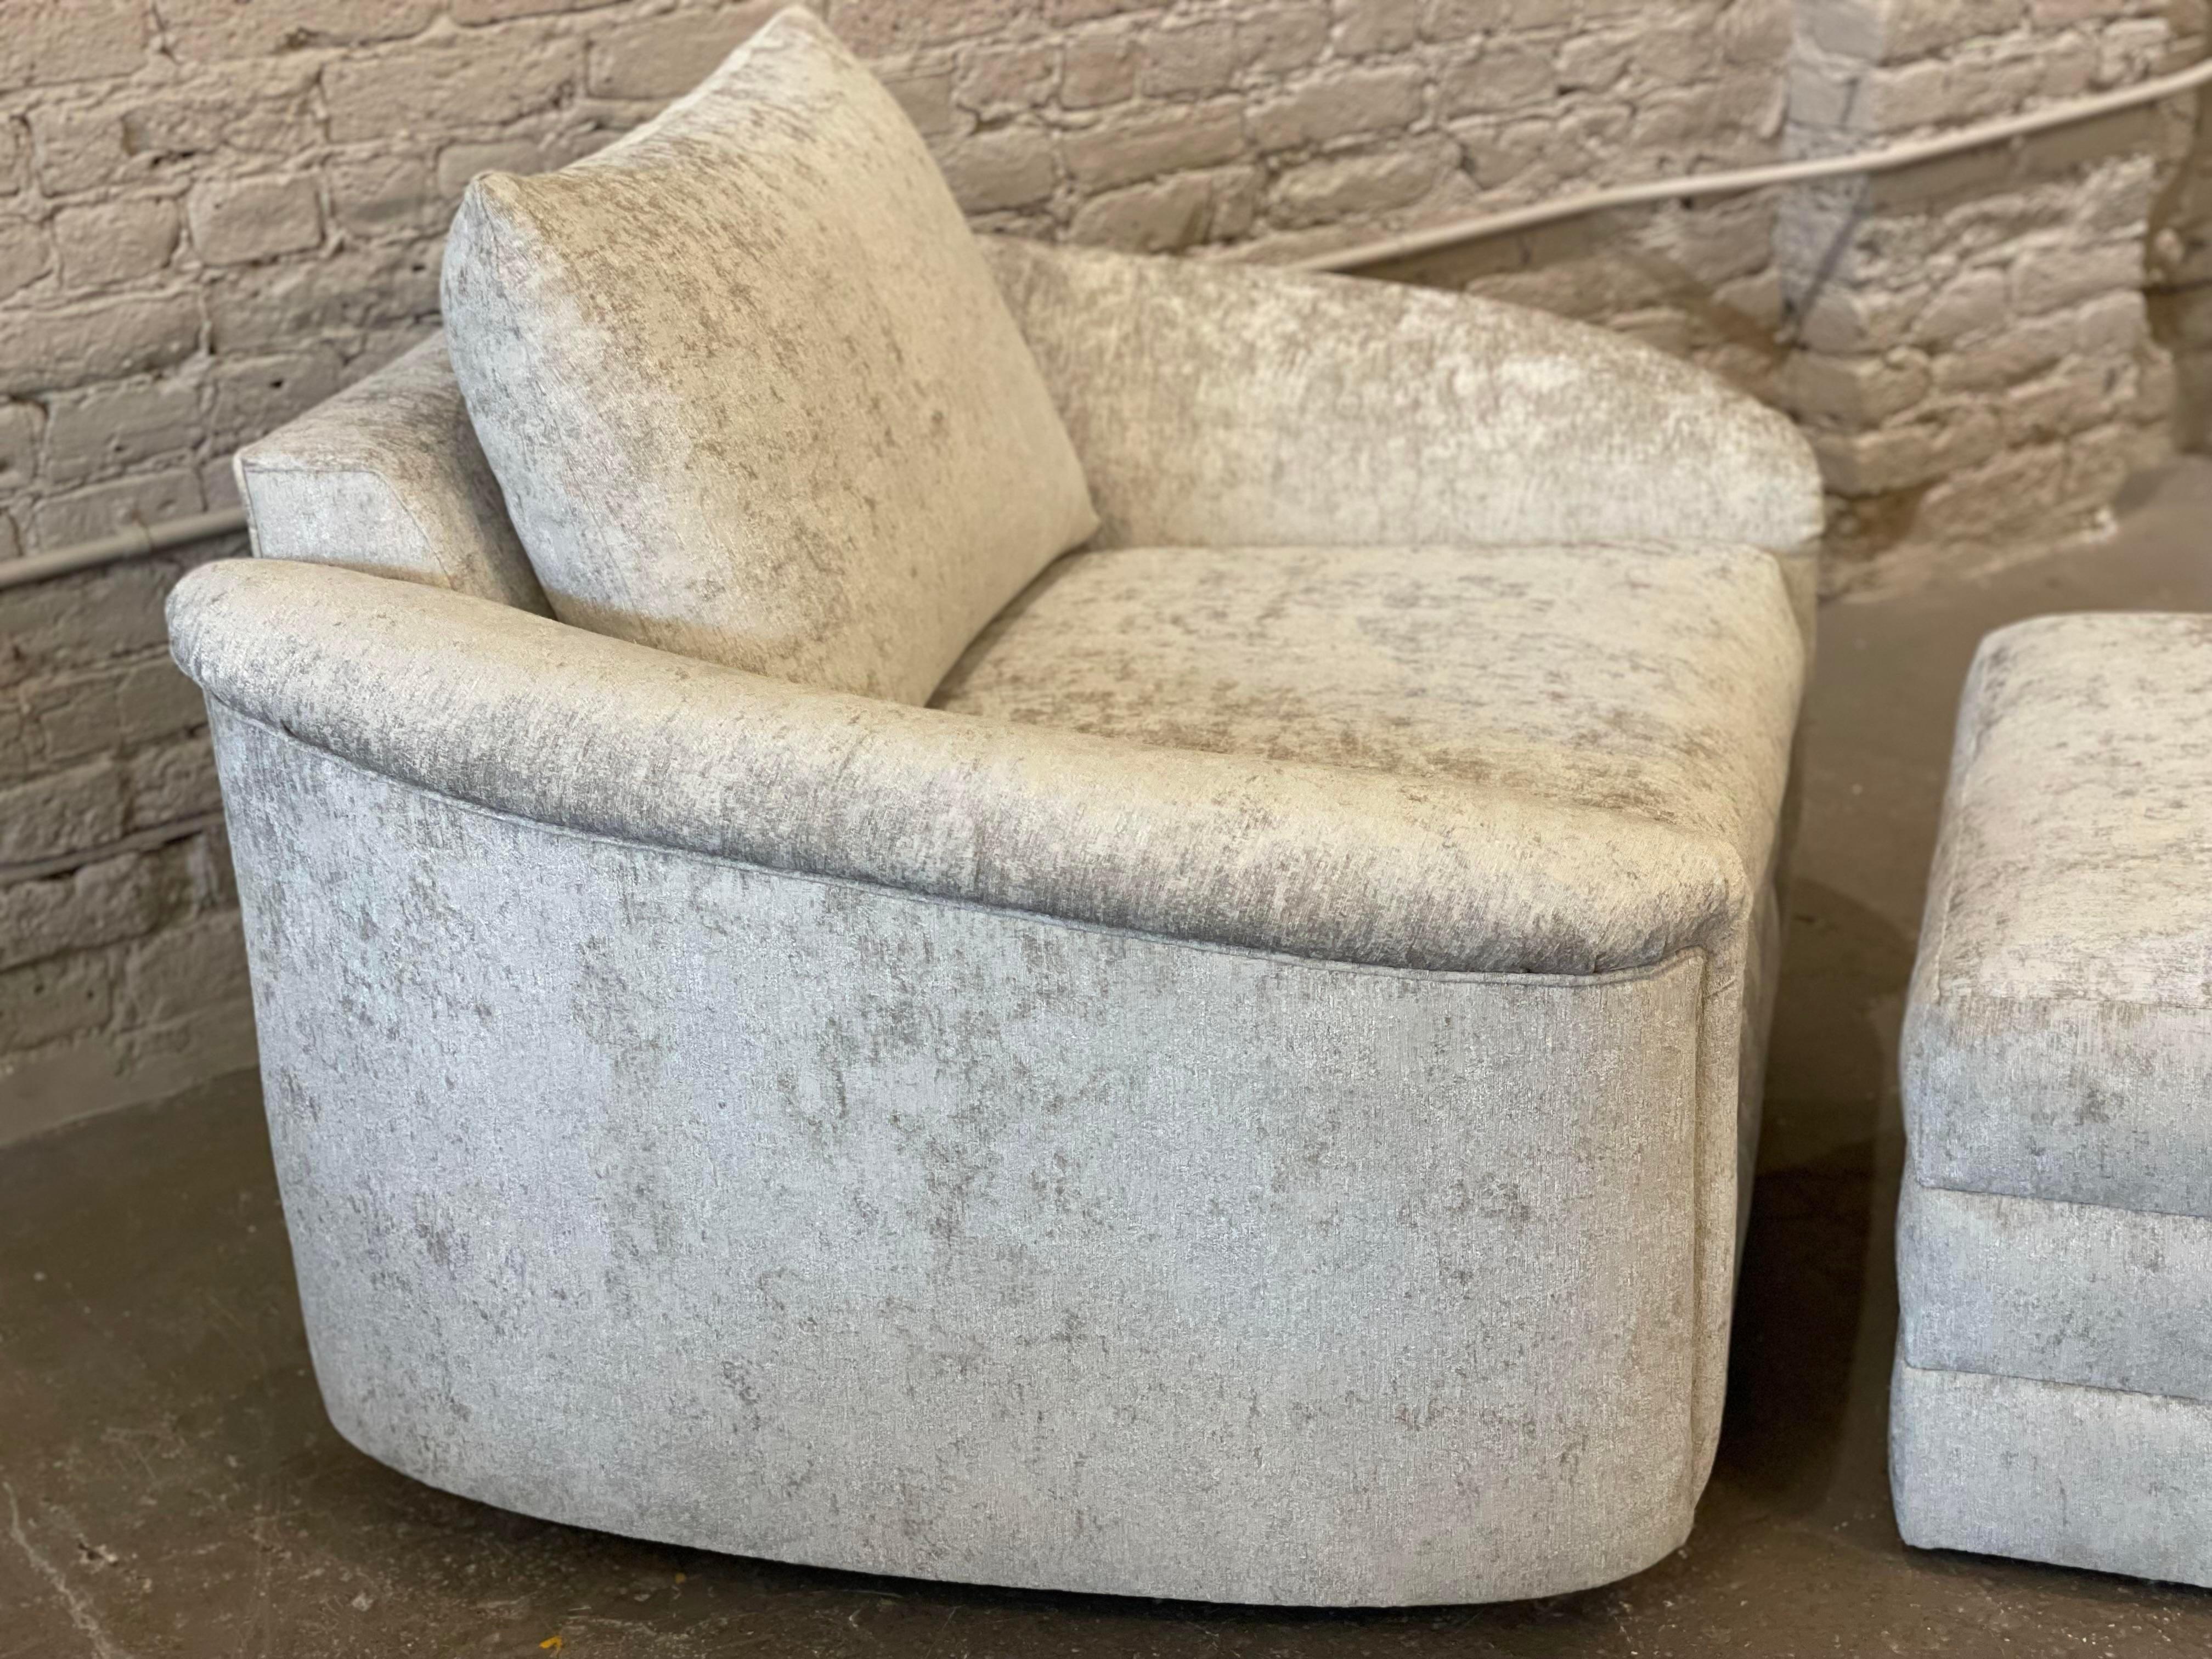 Post-Modern 1980s Oversized Postmodern Swivel Chair and Ottoman Reupholstered - Set of 2 For Sale